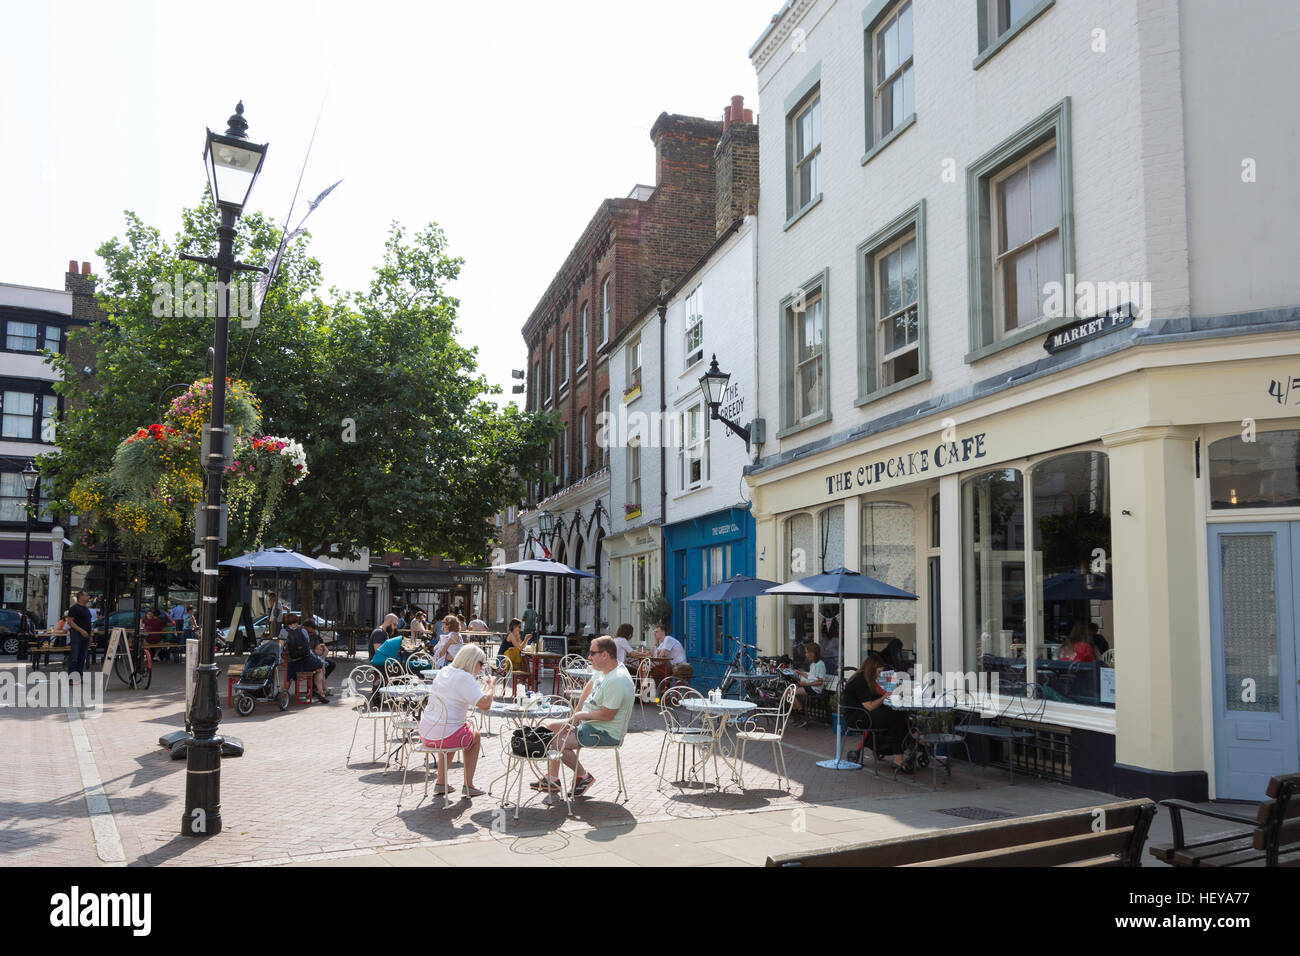 Outdoor seating at The Cupcake cafe, Market Place, Old Town, Margate, Kent, England, United Kingdom Stock Photo